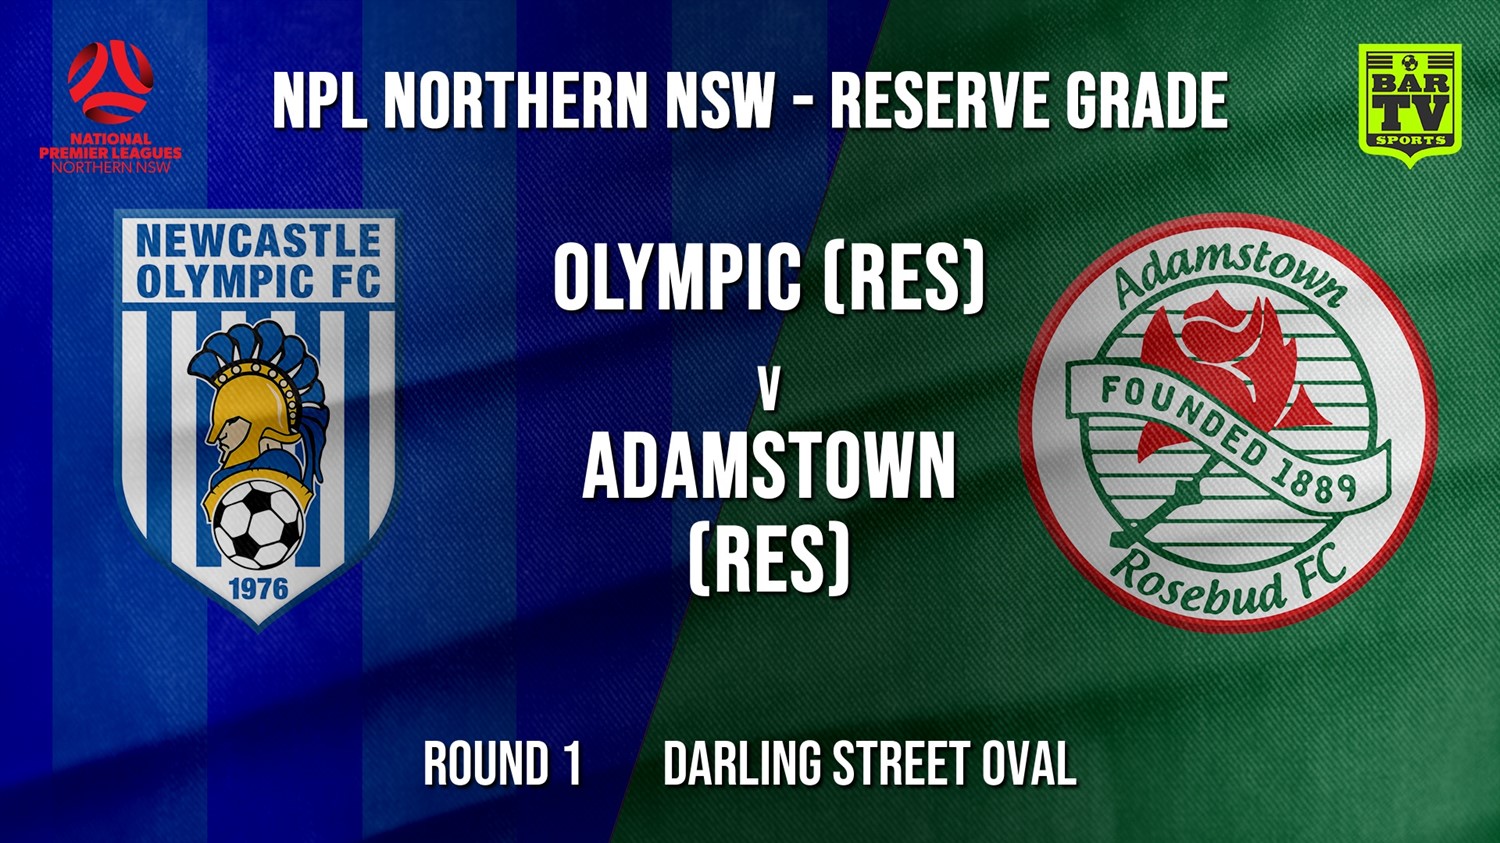 NPL NNSW RES Round 1 - Newcastle Olympic (Res) v Adamstown Rosebud FC (Res) Minigame Slate Image